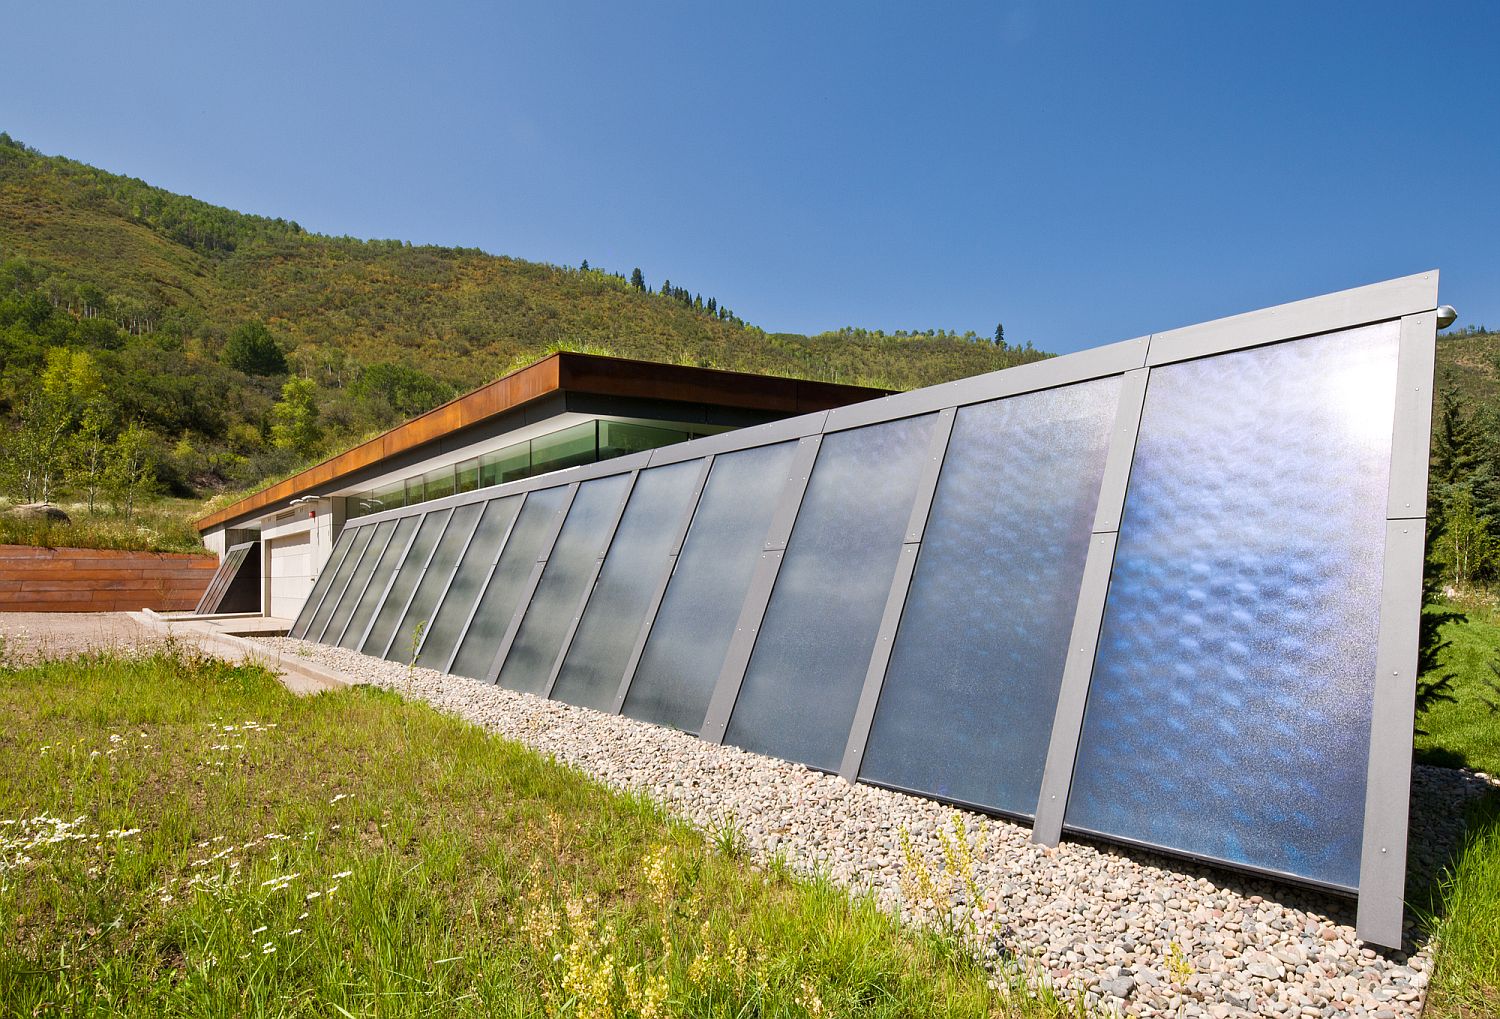 Photovoltaic-panels-coupled-with-a-green-roof-create-a-lovely-green-home